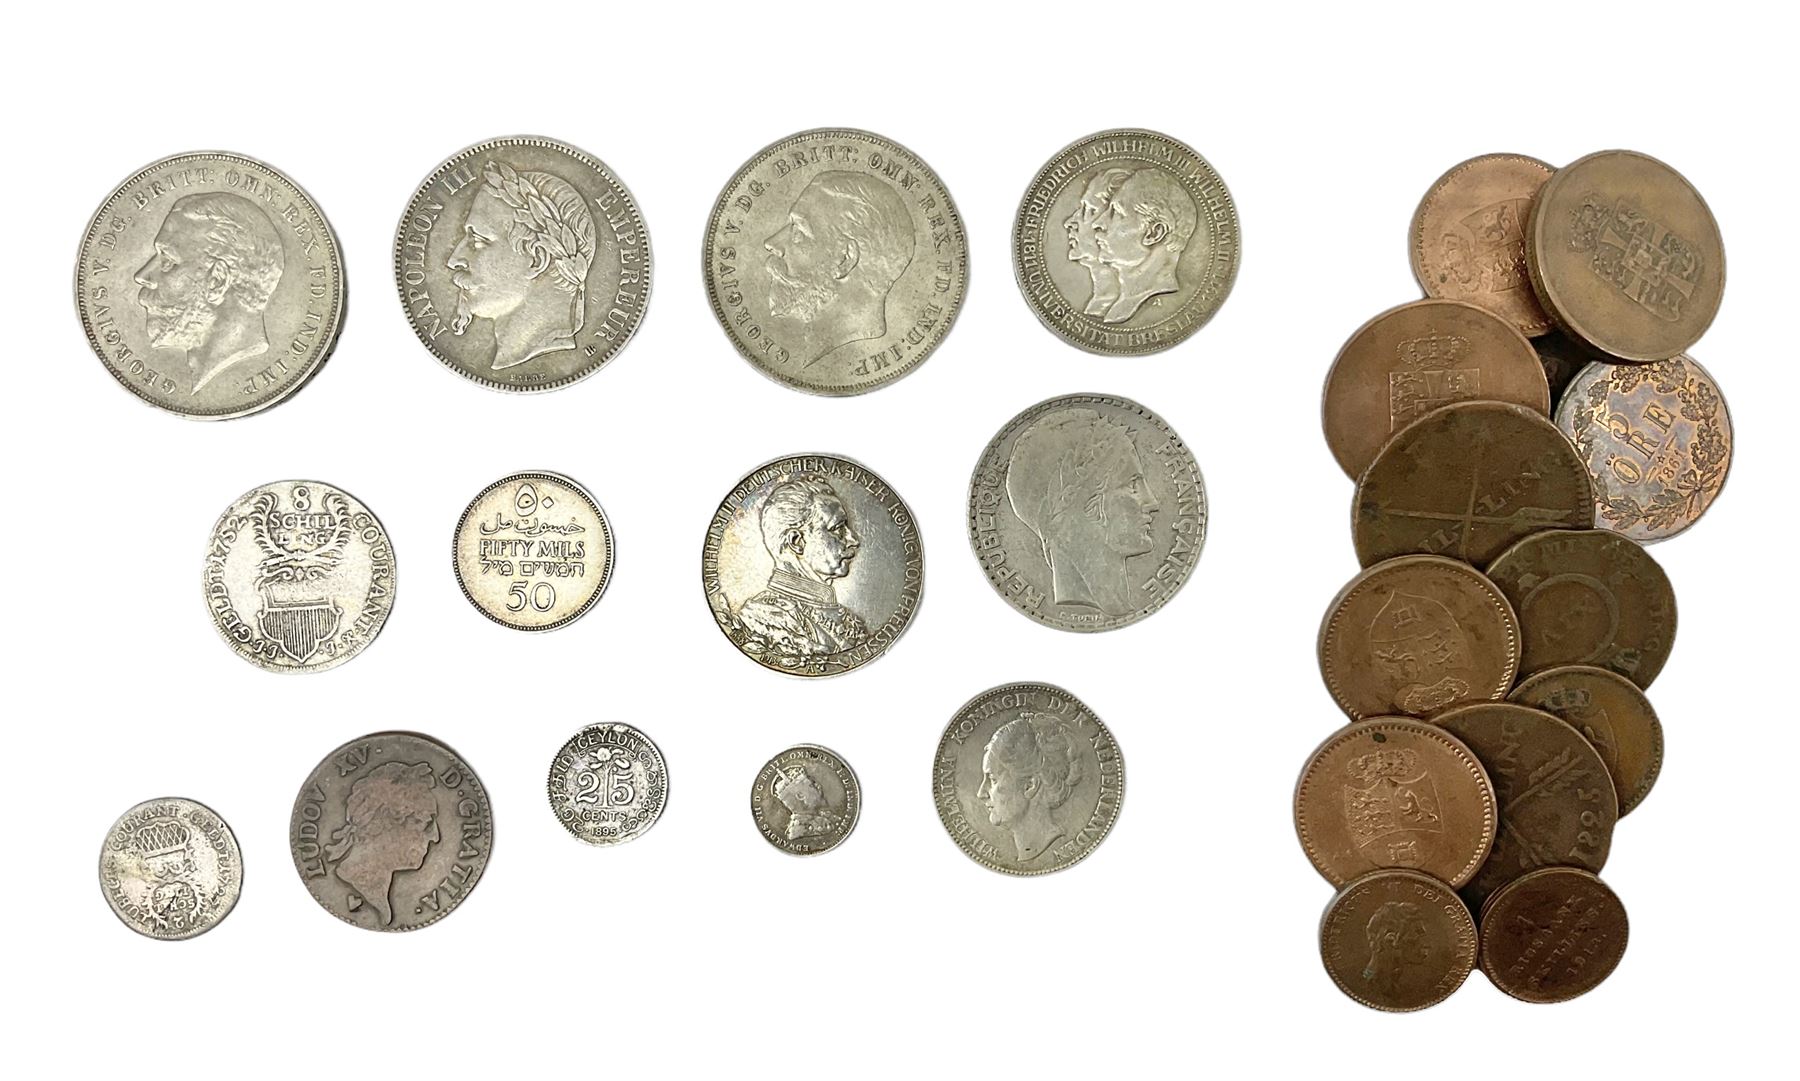 Great British and World coins and tokens